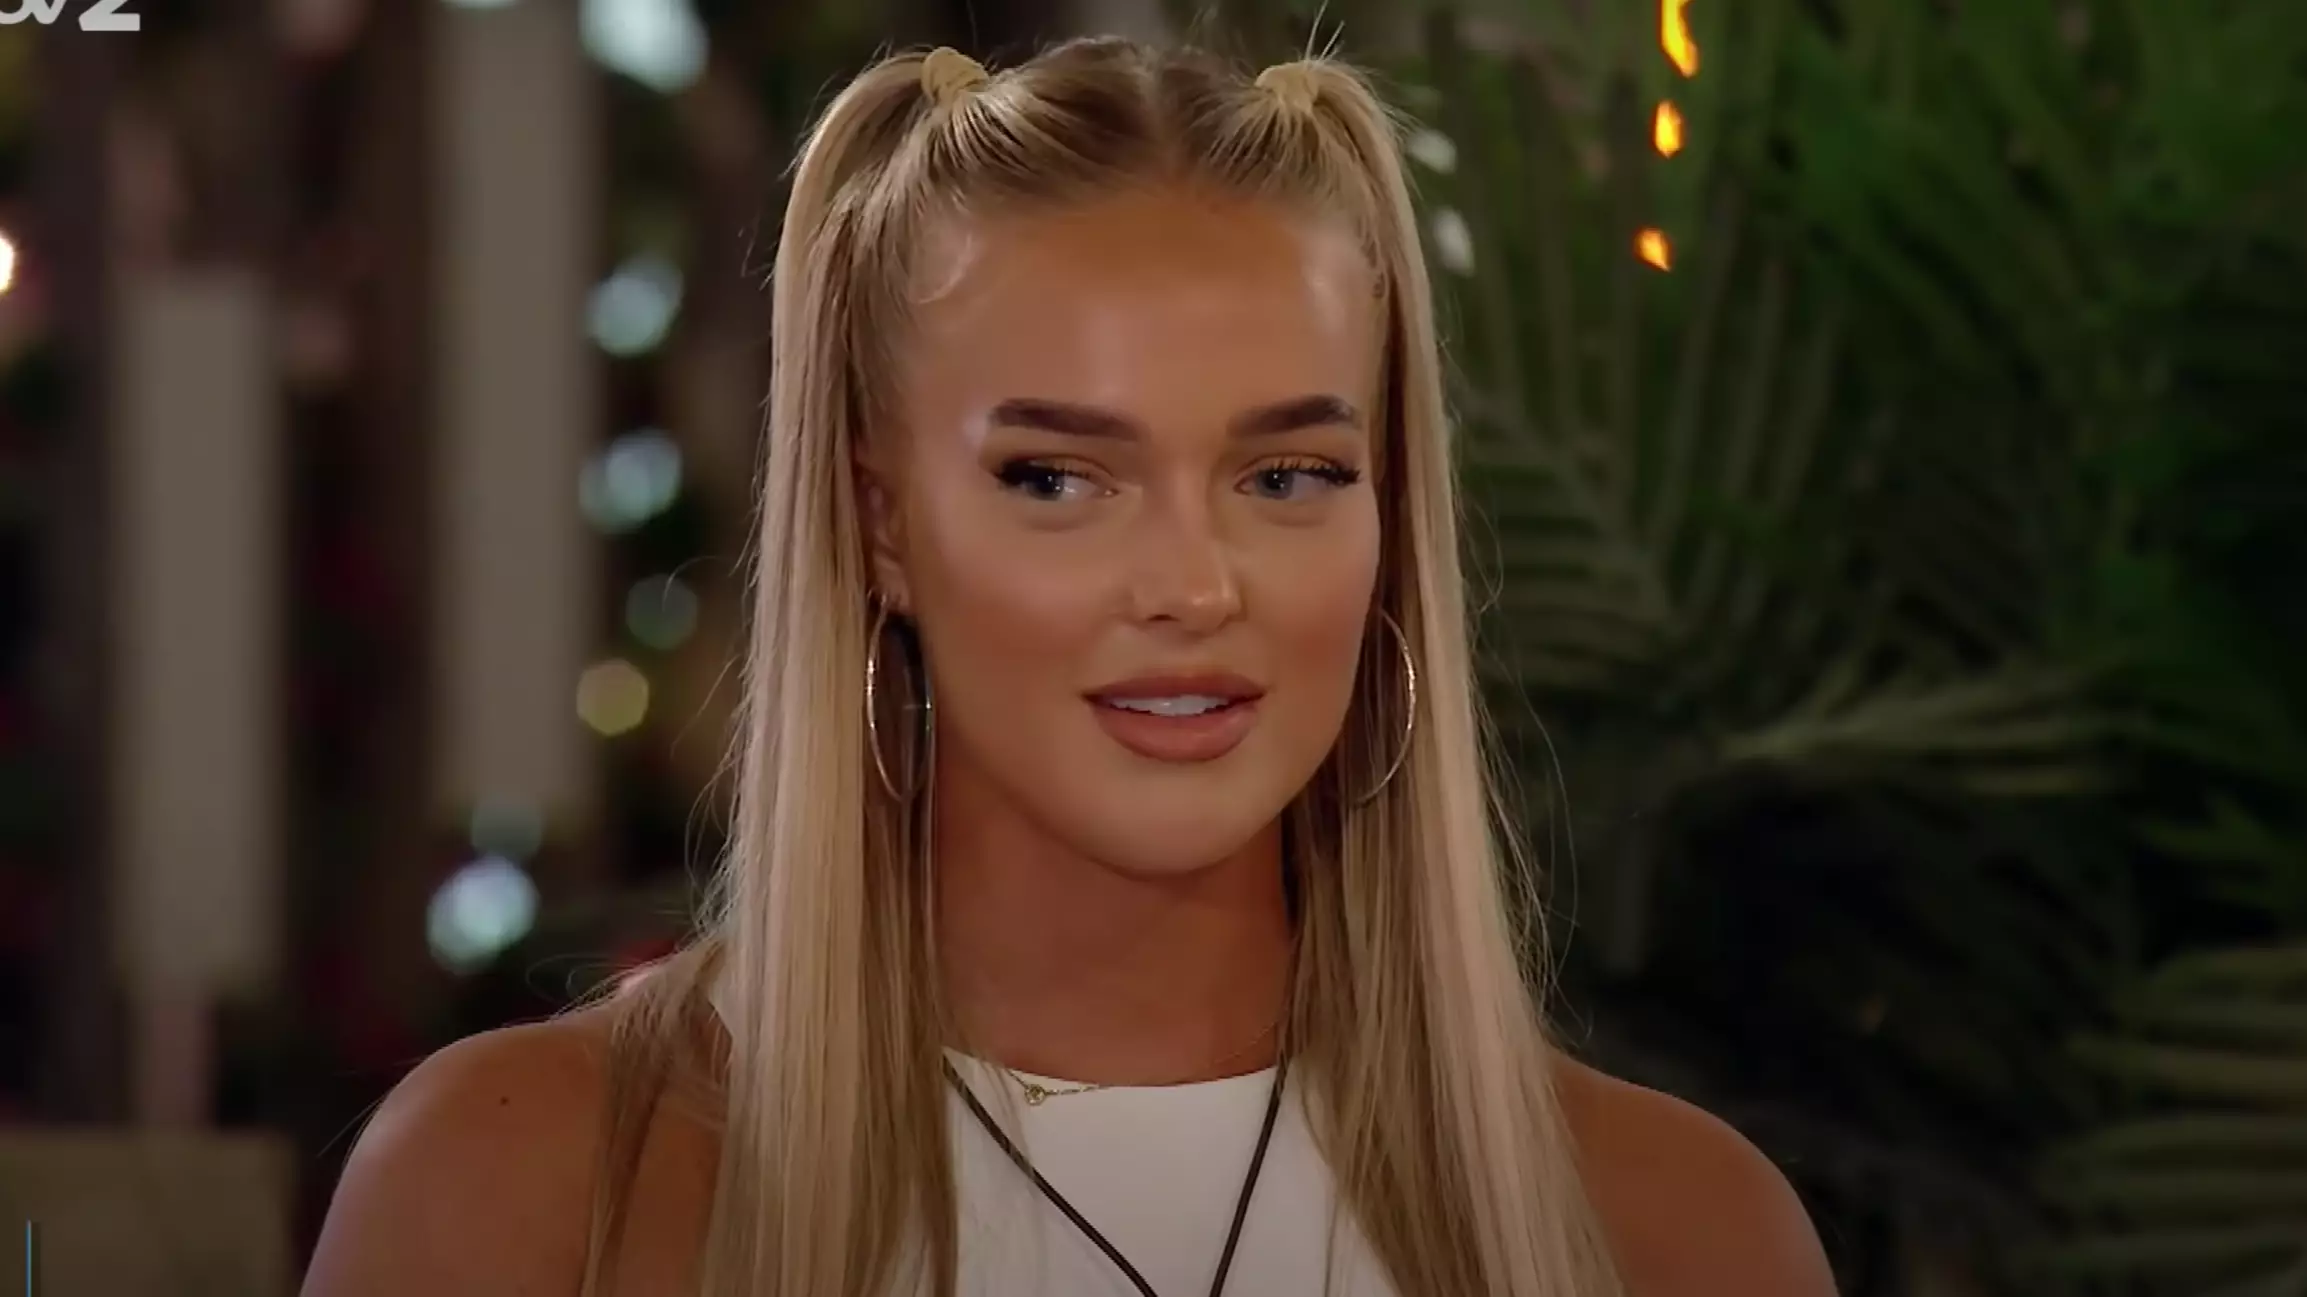 Love Island Fans Divided After Mary's Comment Before 'Rude' Speech